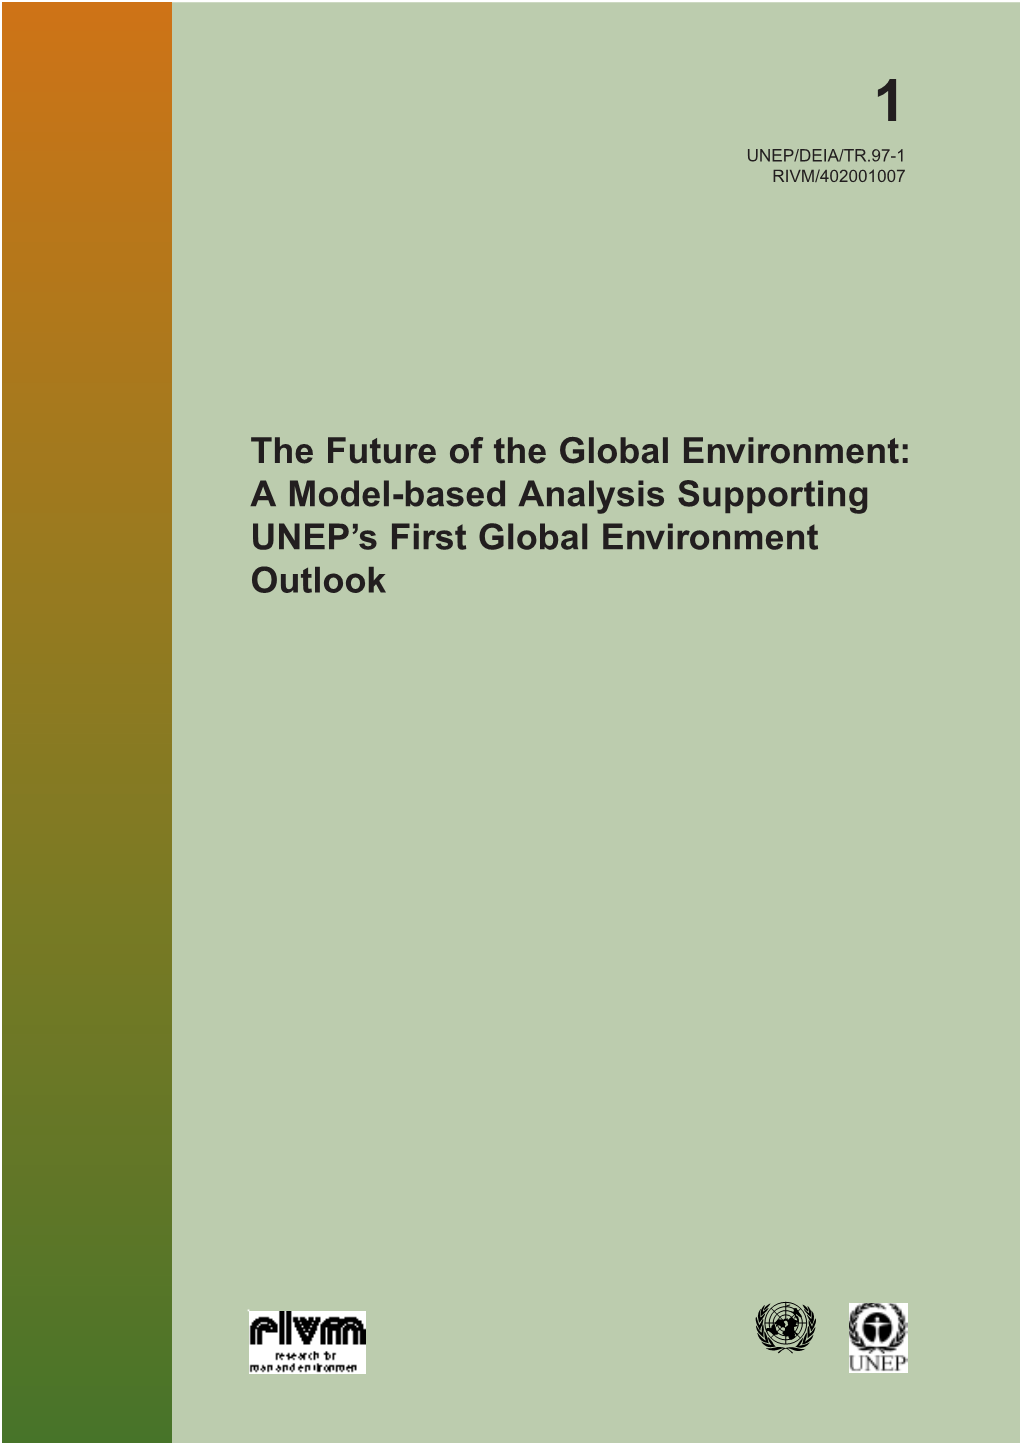 The Future of the Global Environment